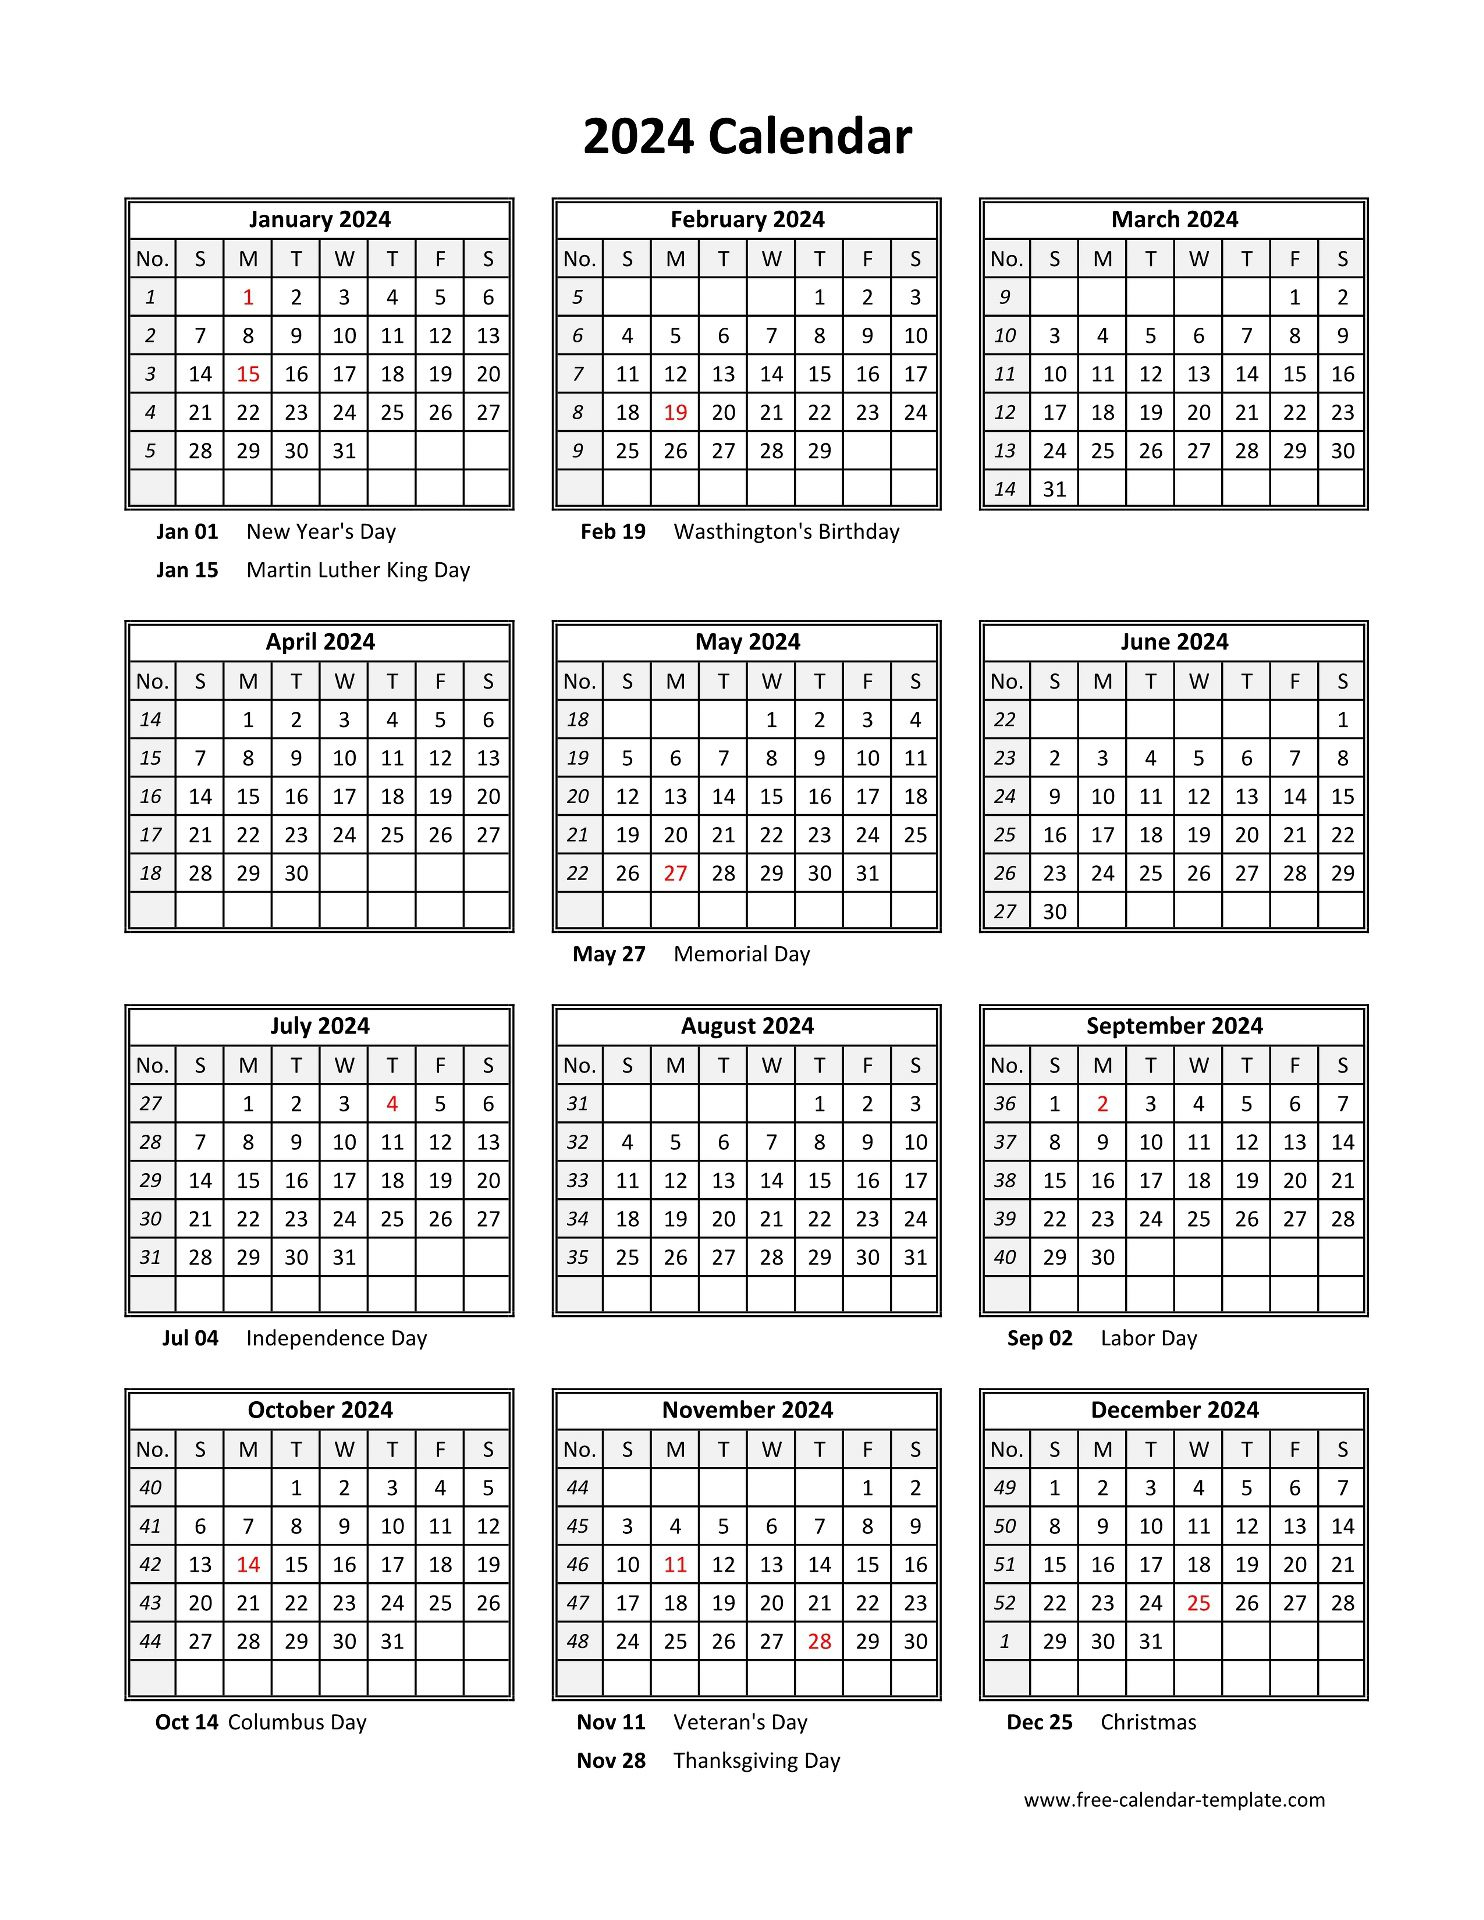 Yearly Printable Calendar 2024 With Holidays | Free-Calendar | 1 Year Printable Calendar 2024